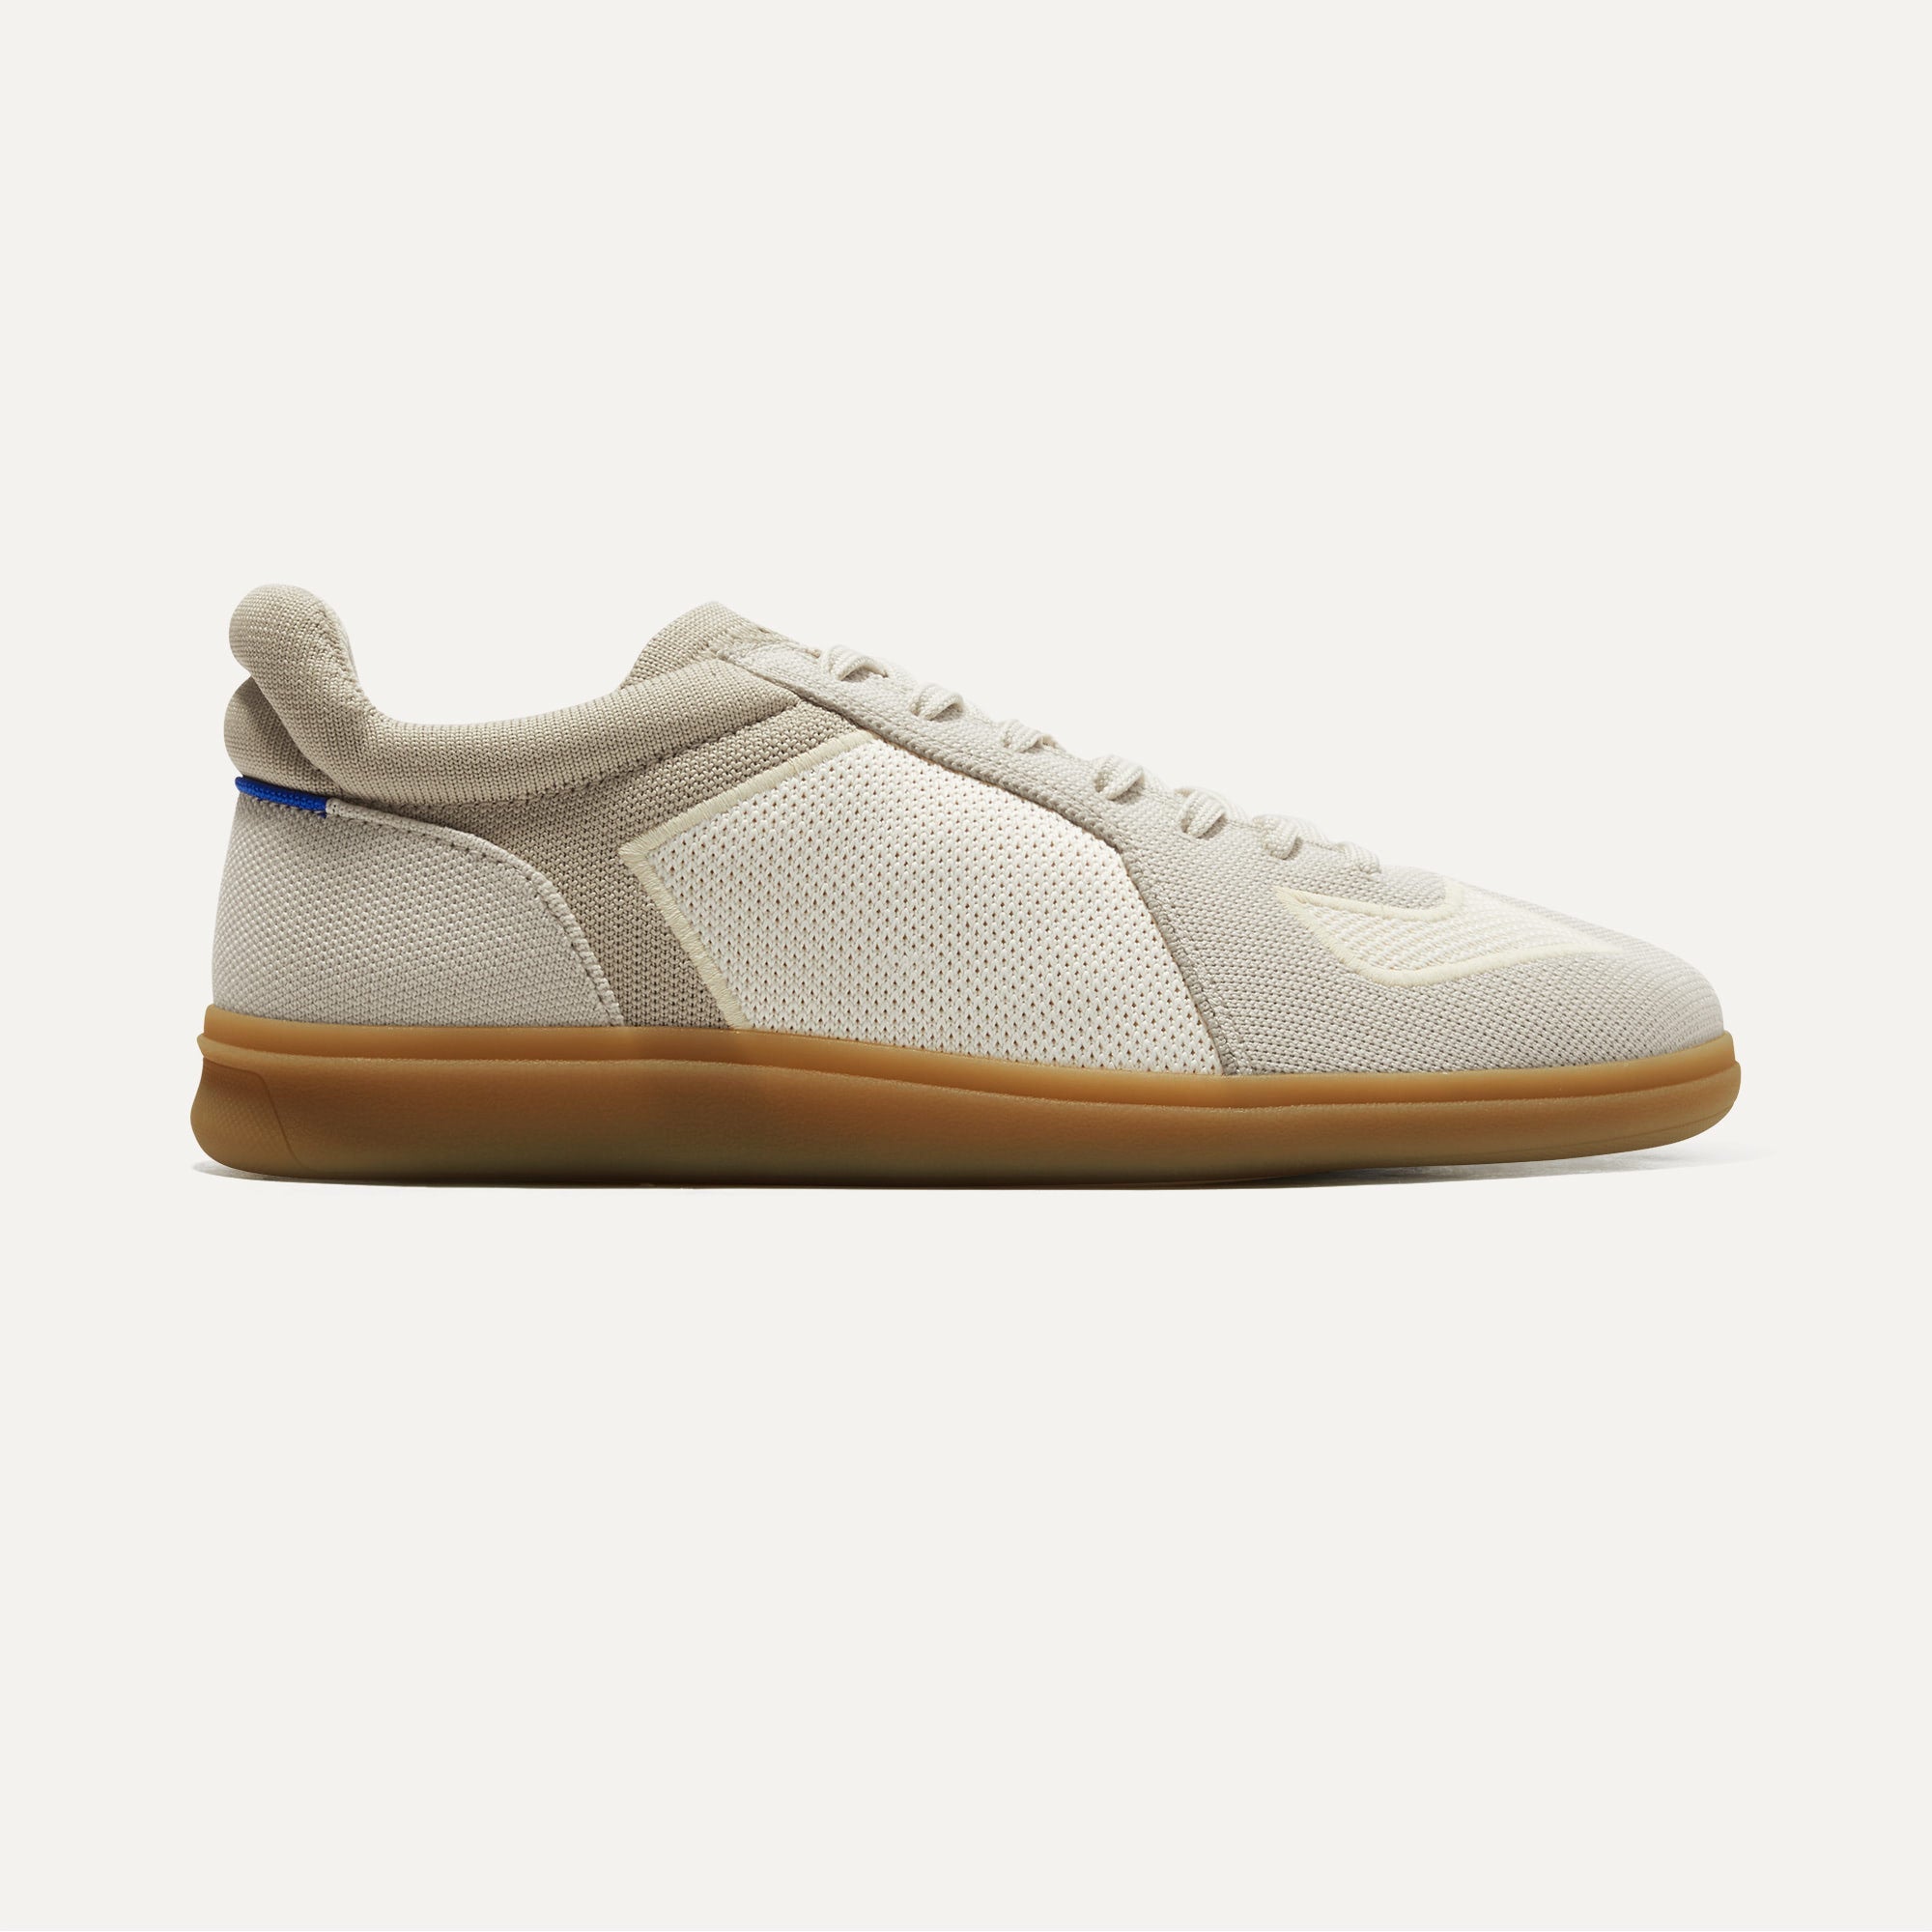 The RS01 Sneaker in Pelican Grey | Men's Tennis Shoes | Rothy's